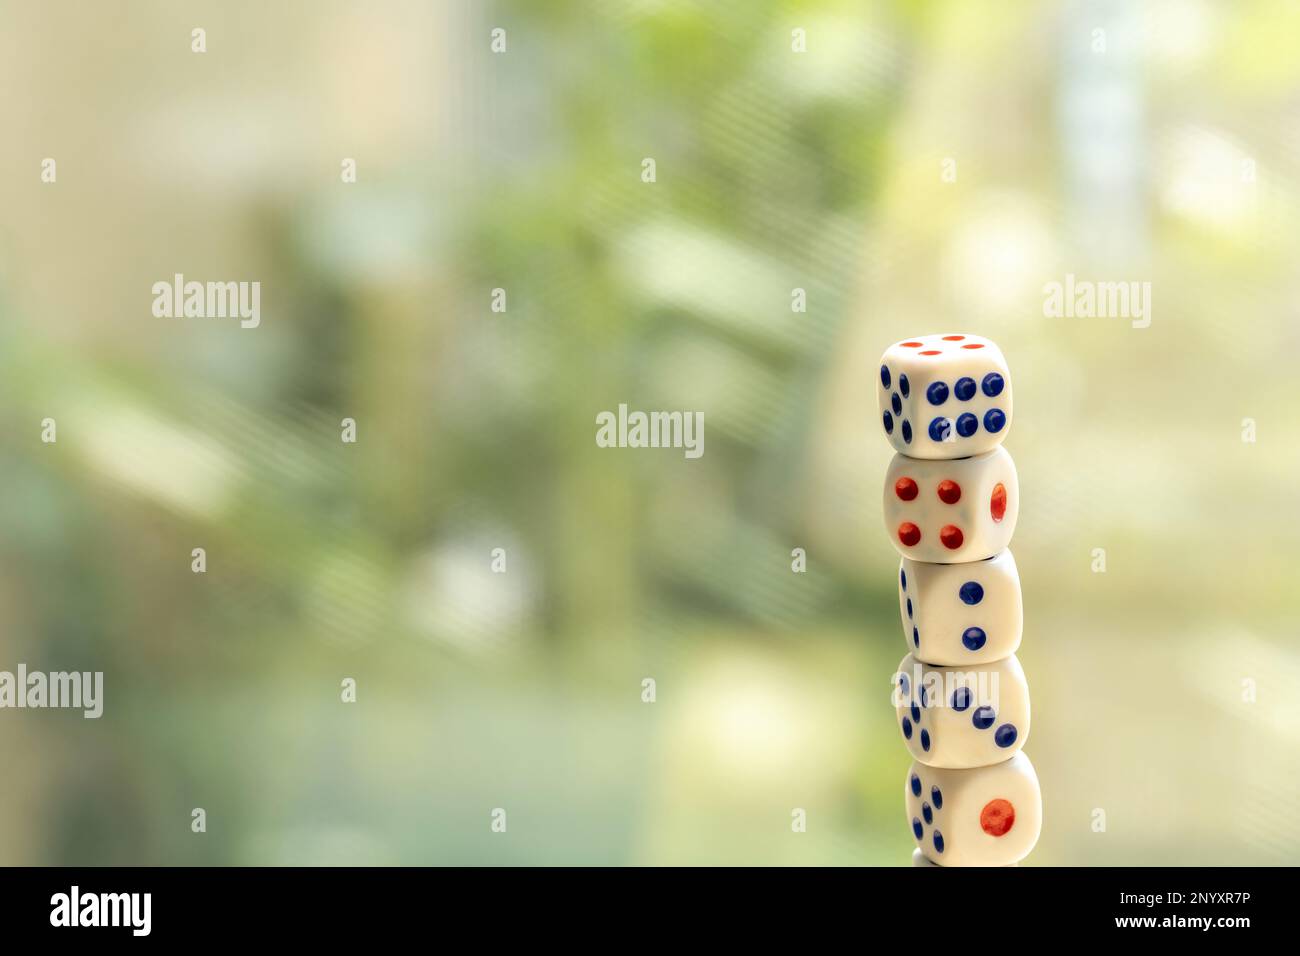 Stack tower of many small game dice isolated on a bright blurred background, group of objects, nobody. Probability and chance multiple random numbers, Stock Photo